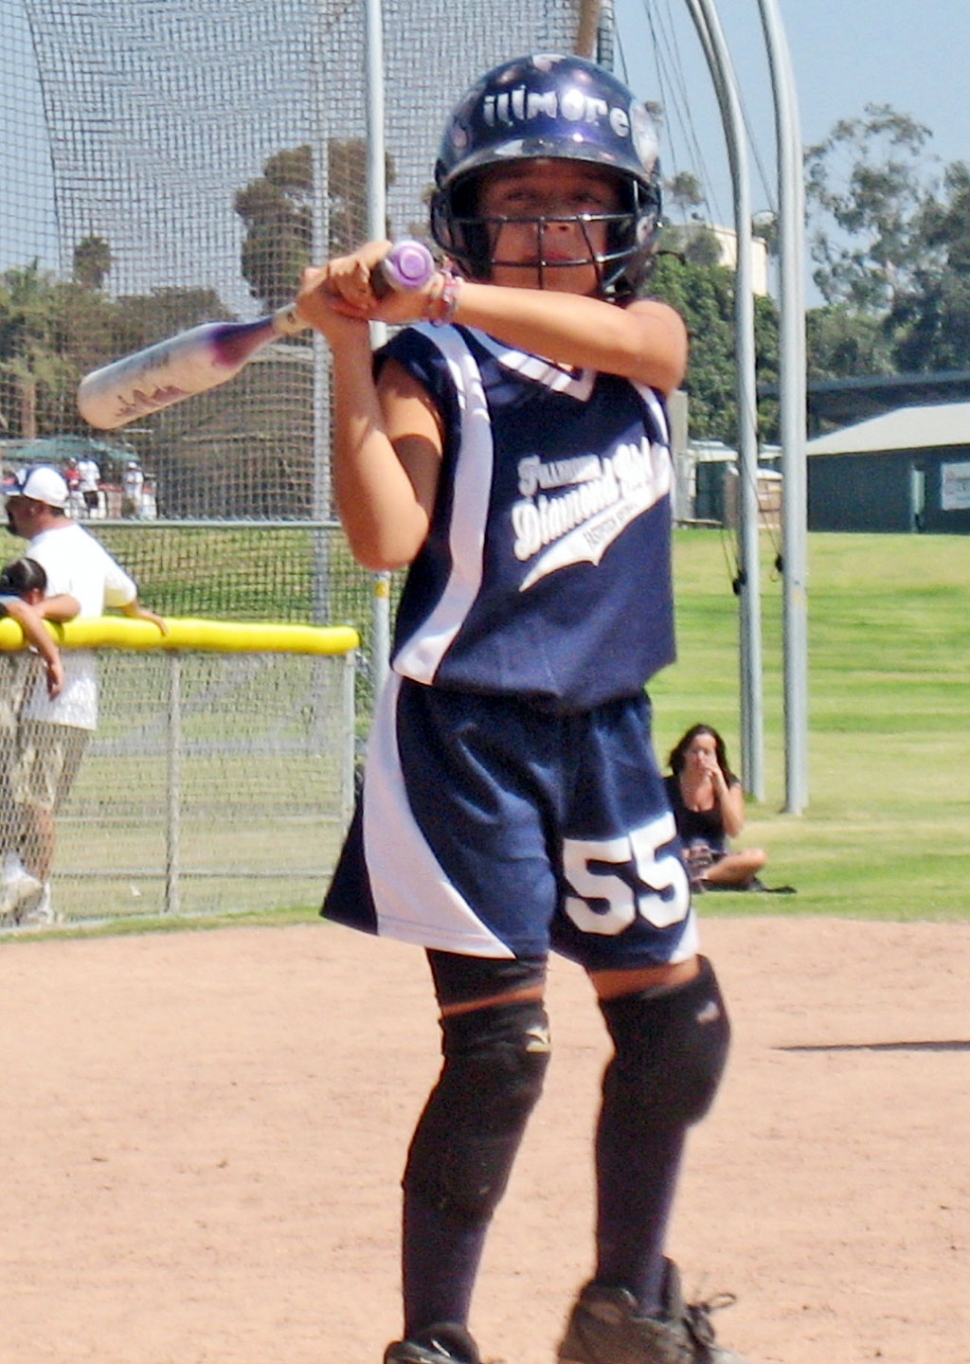 Tatyana Cervantes #55 pitched an awesome game on Sunday, Sept. 21 and also hit in a Grand Slam and a Homerun for the Fillmore Diamond Girlz Softball Team. Good job Tots.